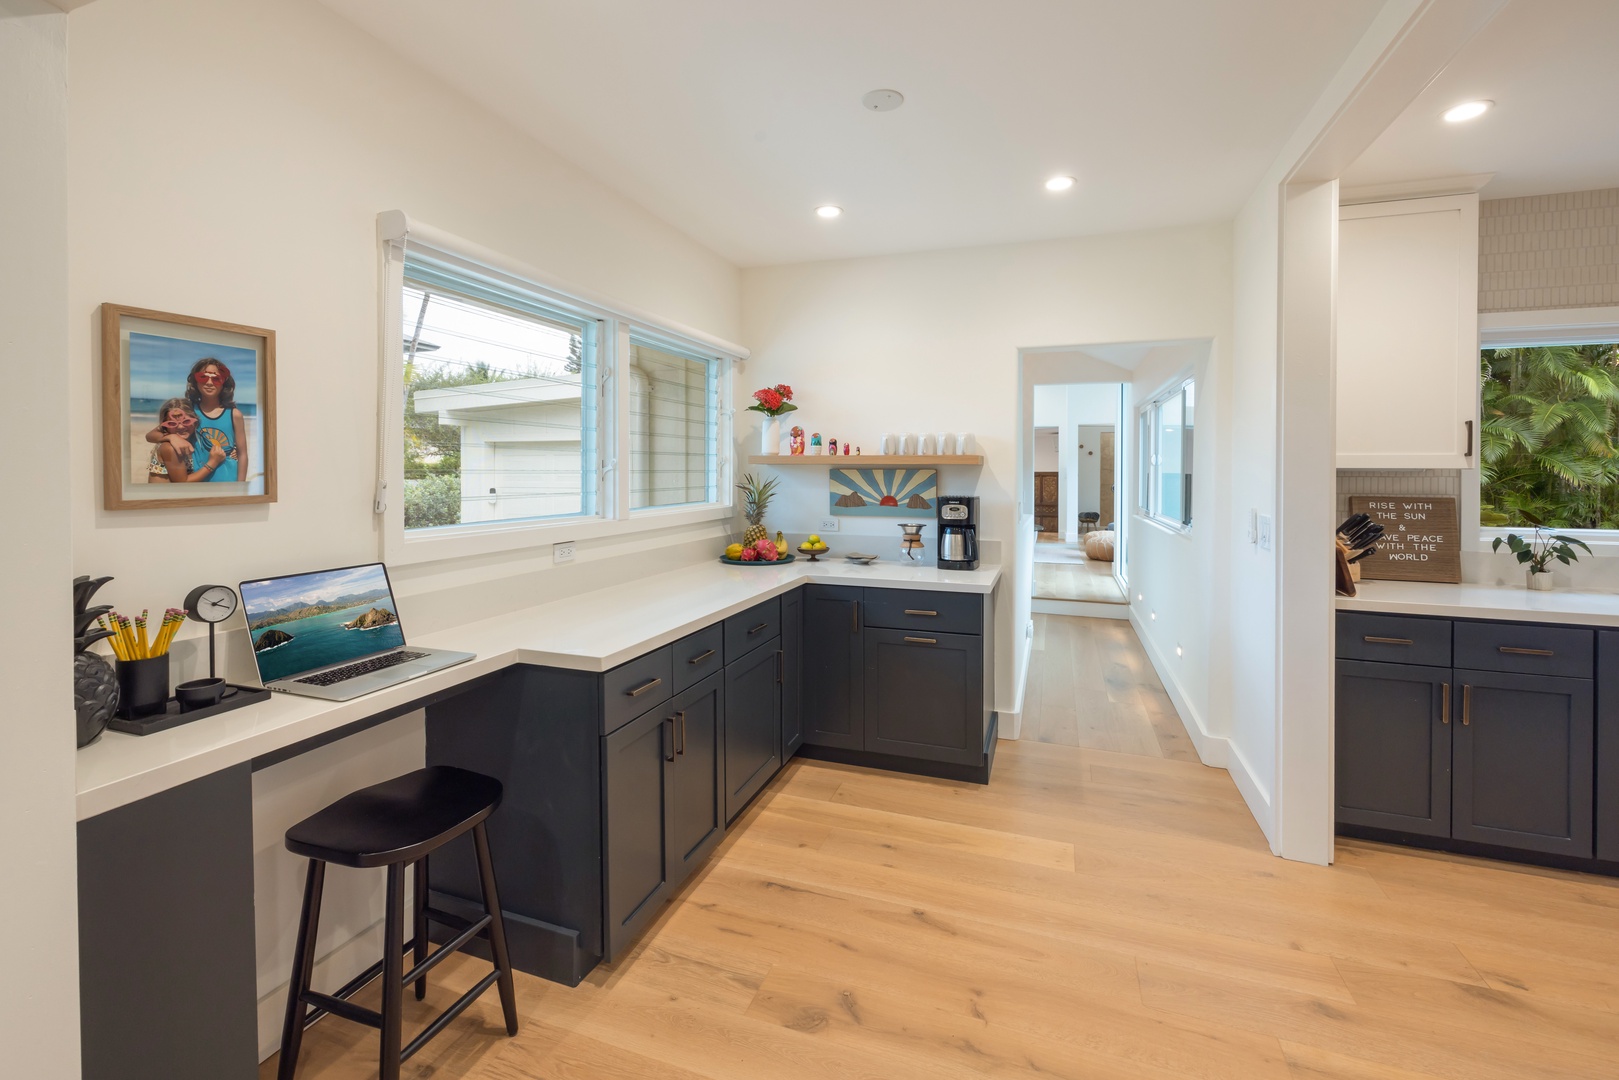 Kailua Vacation Rentals, Lanikai Ola Nani - In the world of beans and brews, a coffee corner is everyone's delight.